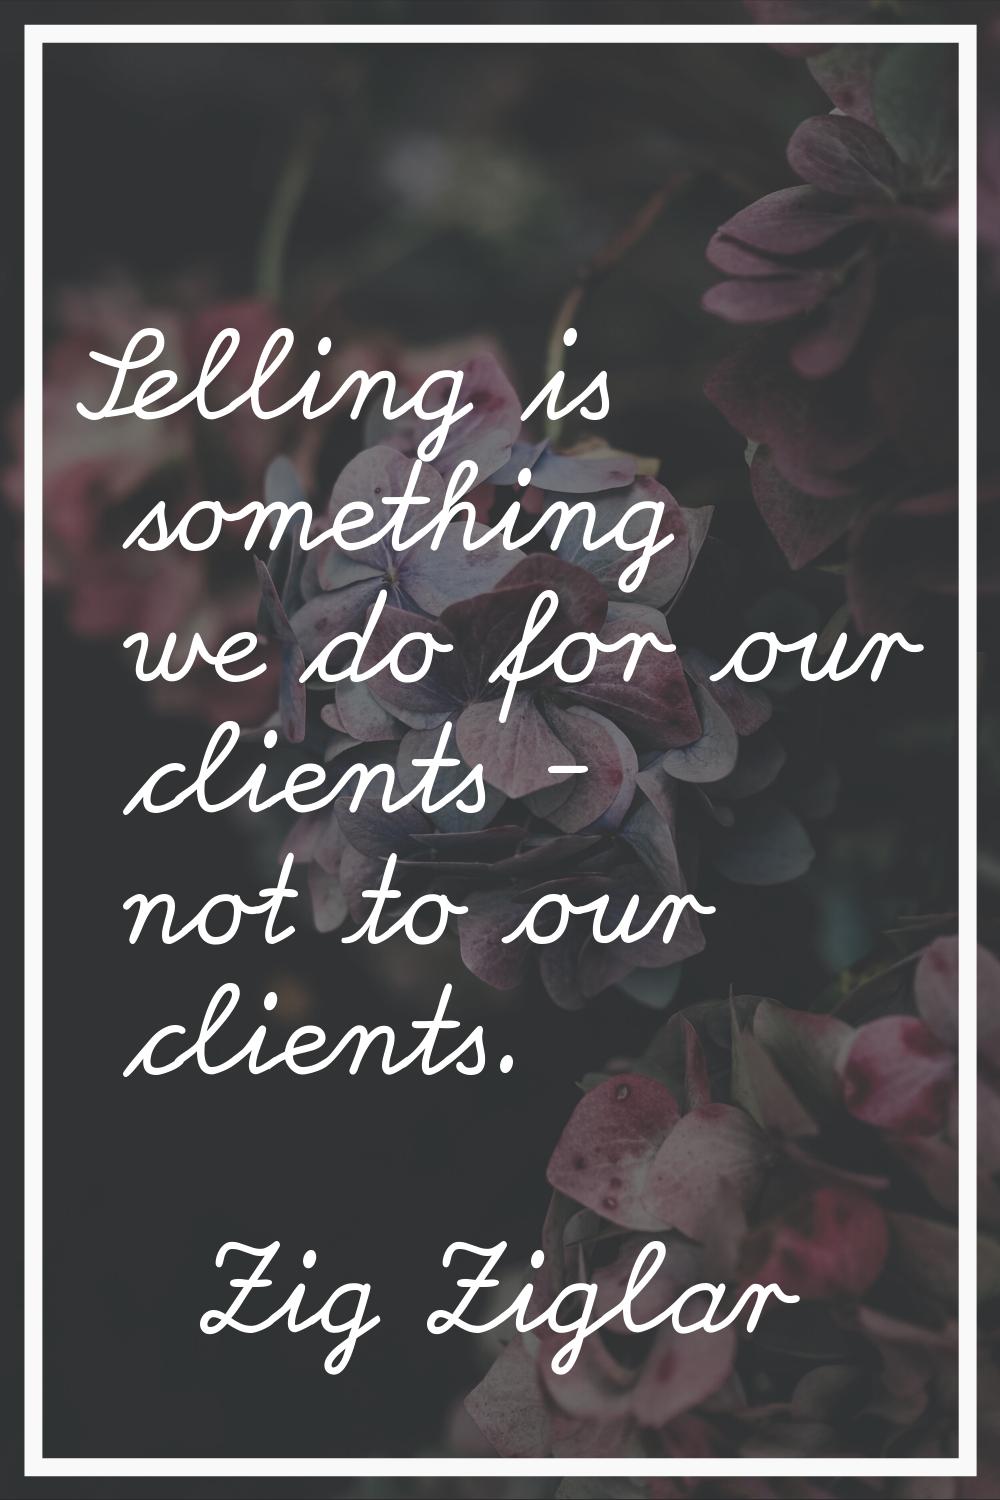 Selling is something we do for our clients - not to our clients.